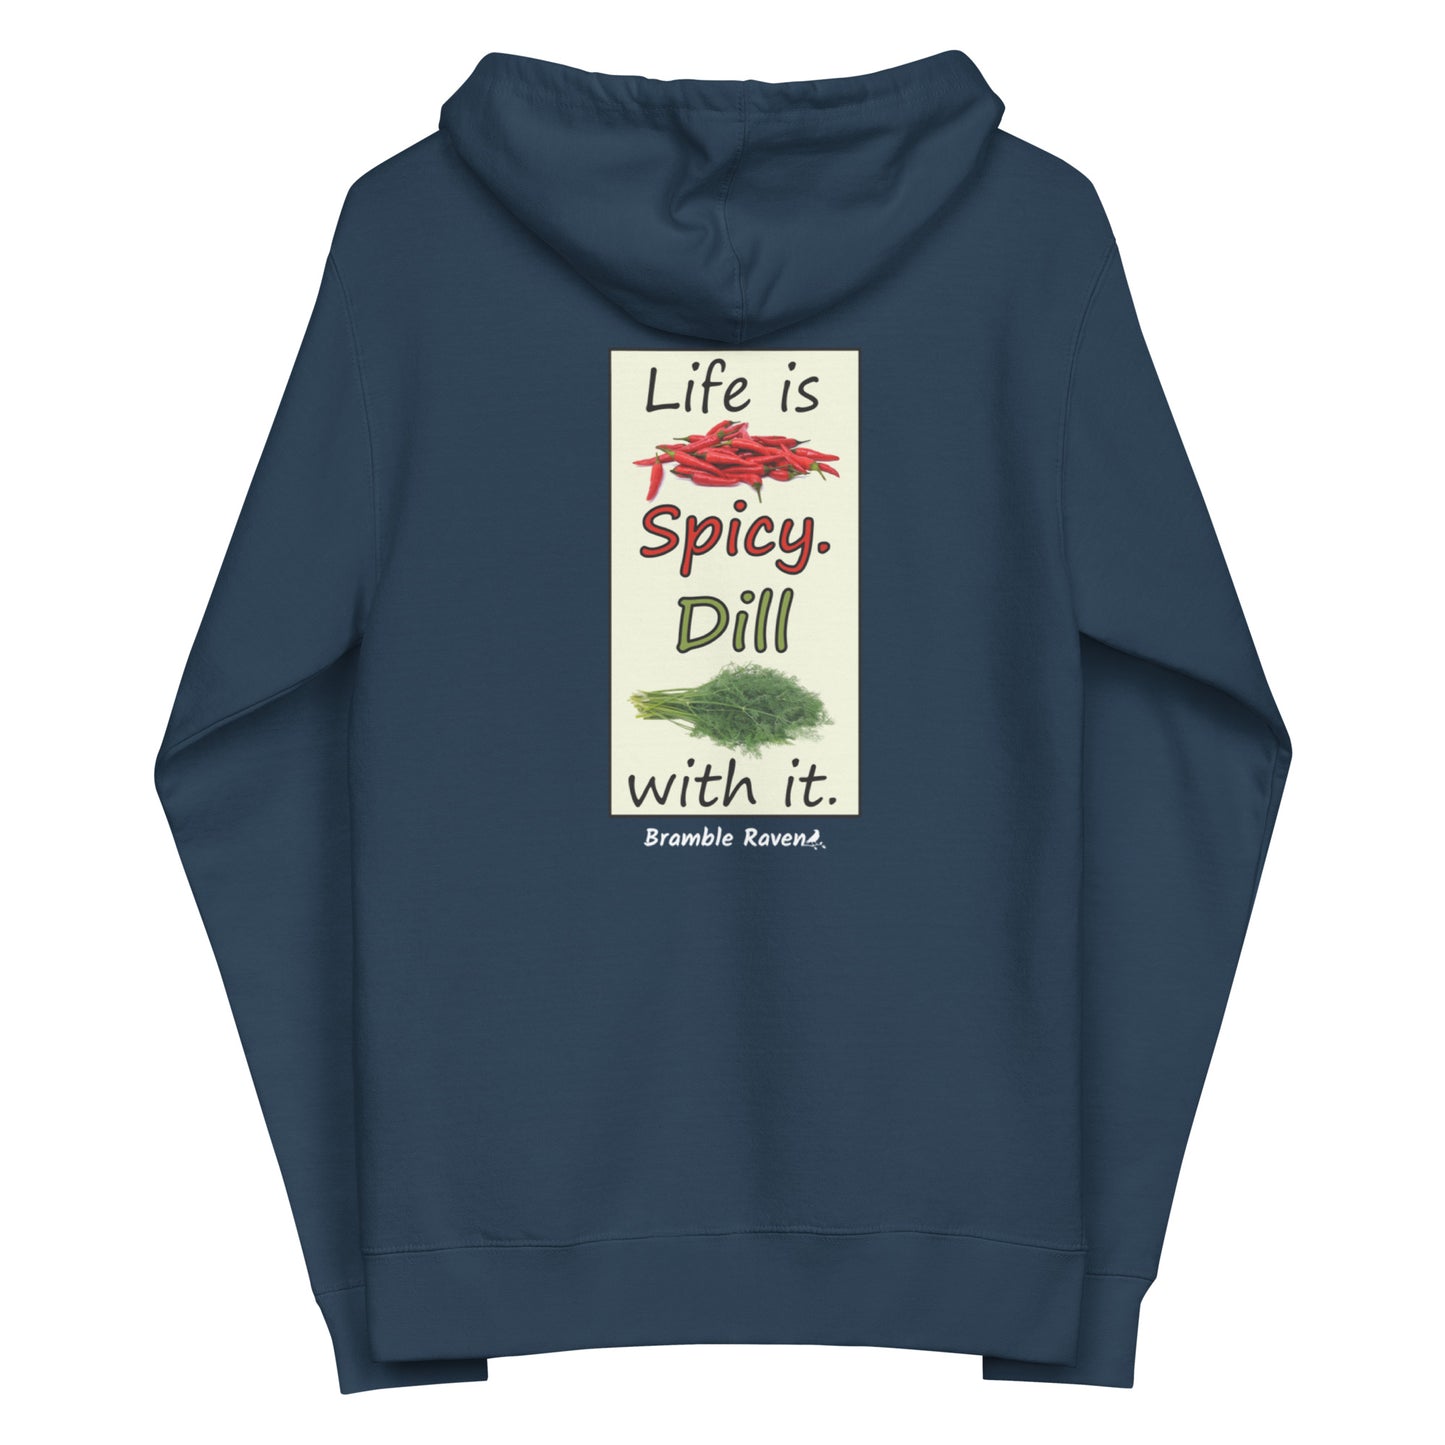 Life is spicy. Dill with it. Text with image of chili peppers and dill weed. Graphic printed on the back of unisex navy blue zip up hoodie. lined with fleece.